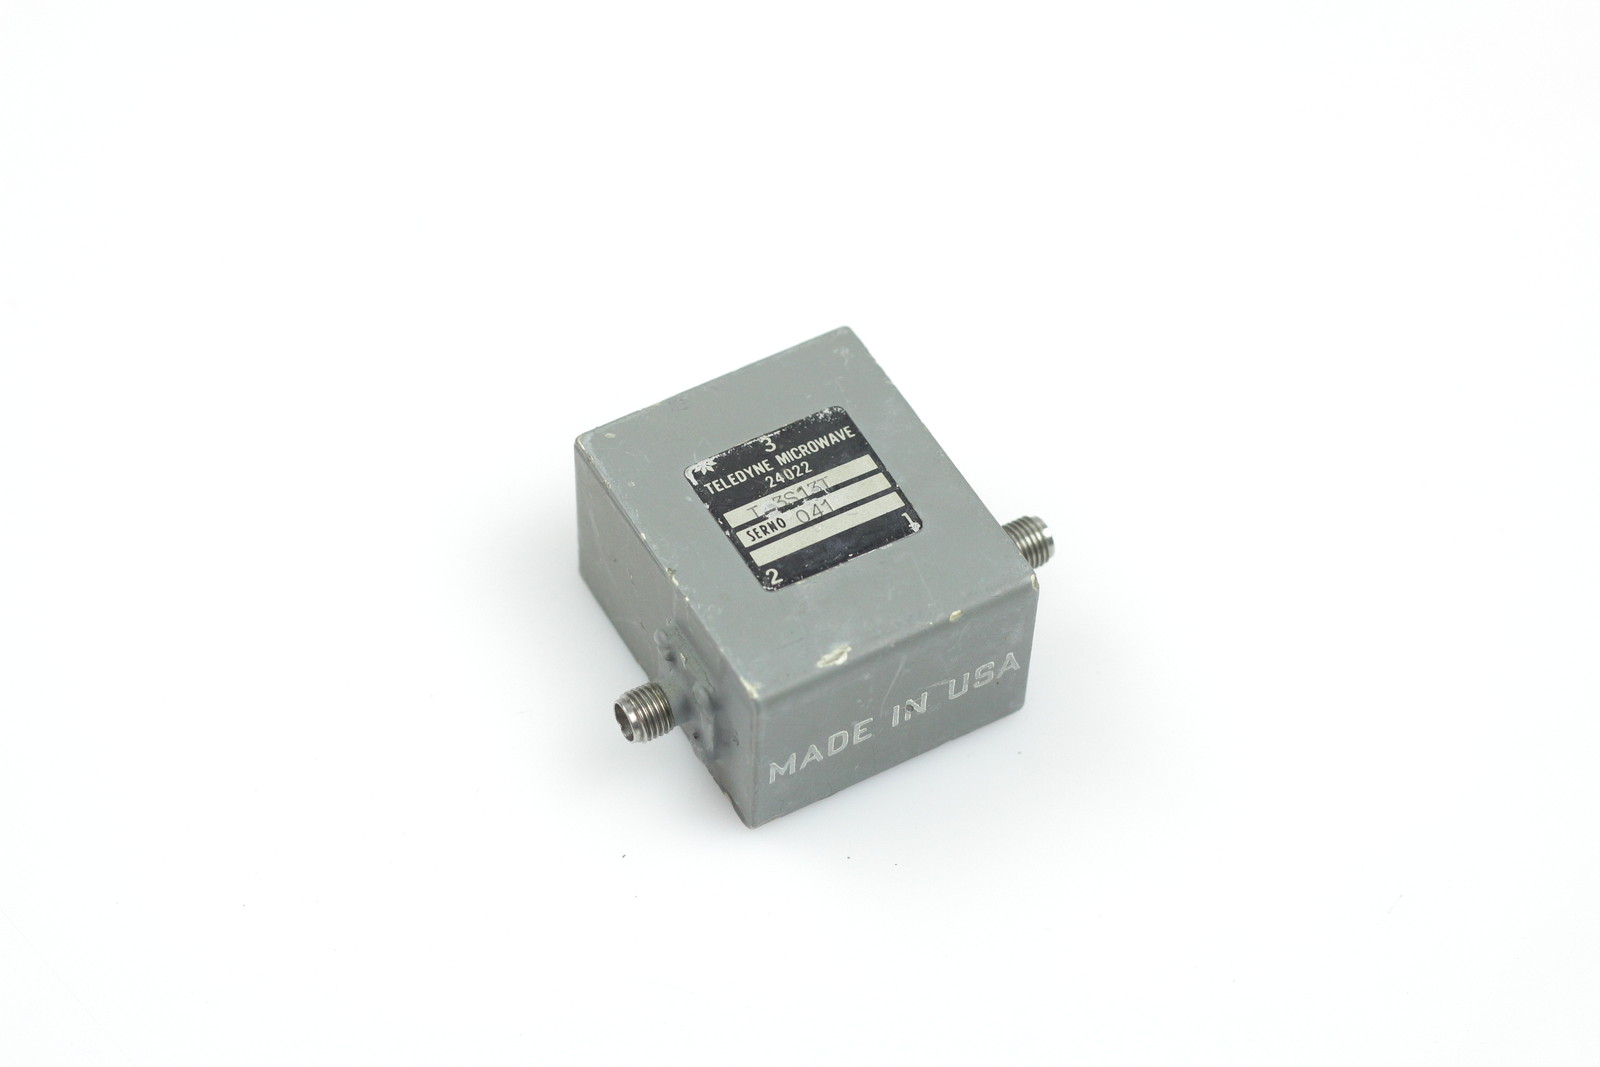 Details about   Teledyne Microwave Isolator 2-4 GHz T-2S63T-60 SMA 